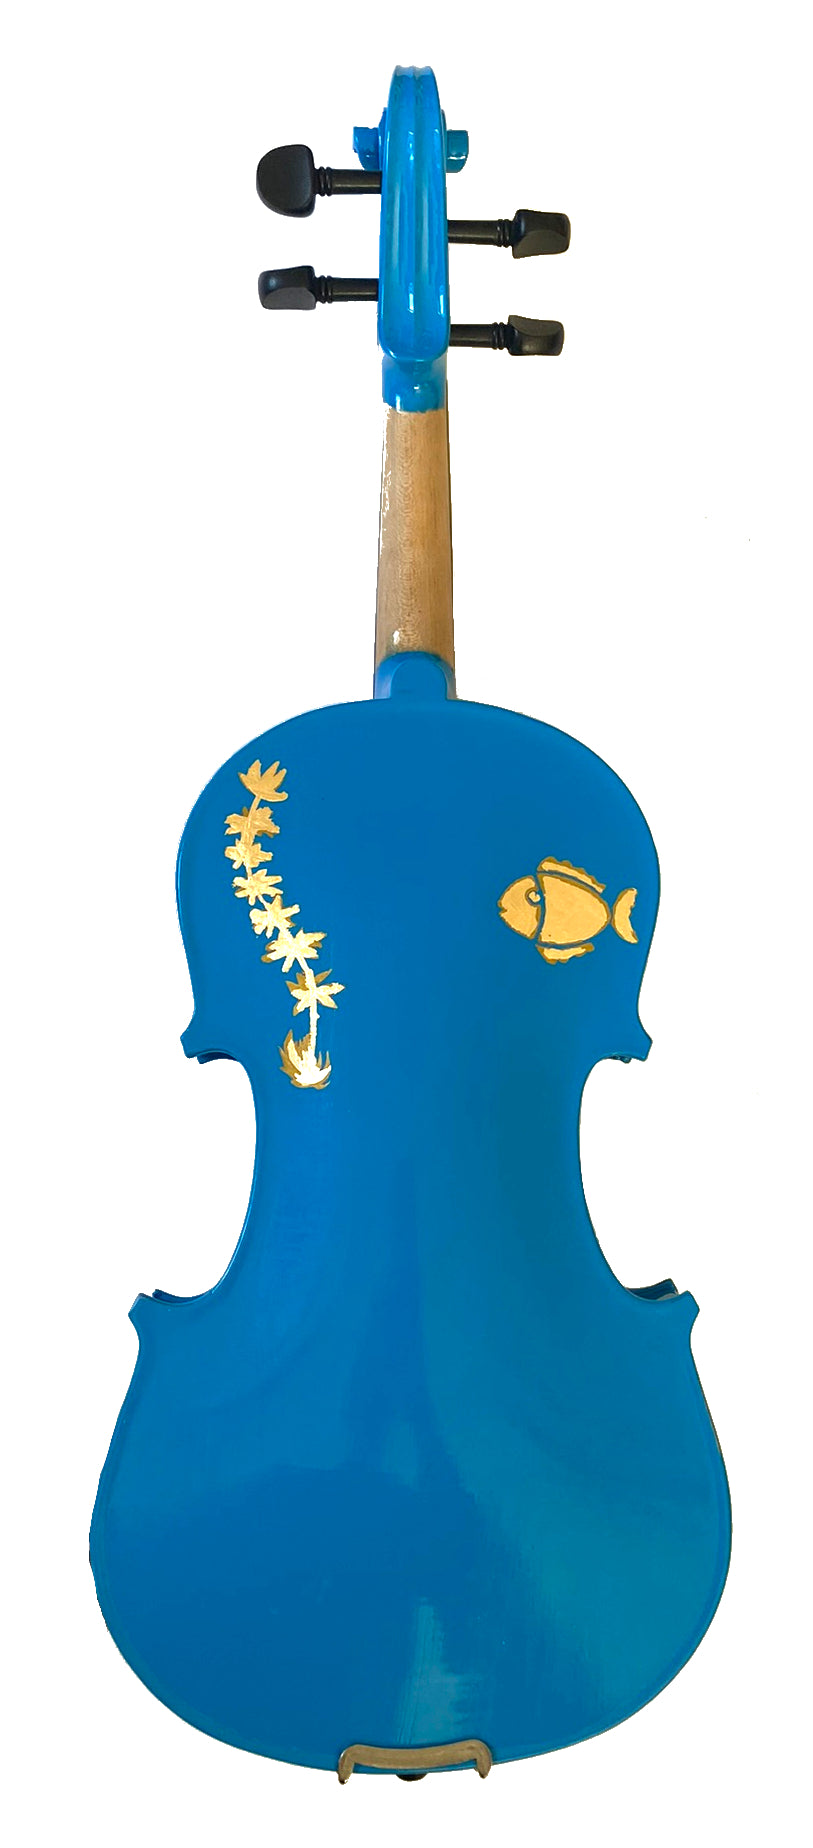 Octopus Bling Blue Violin Outfit - Rozanna's Violins